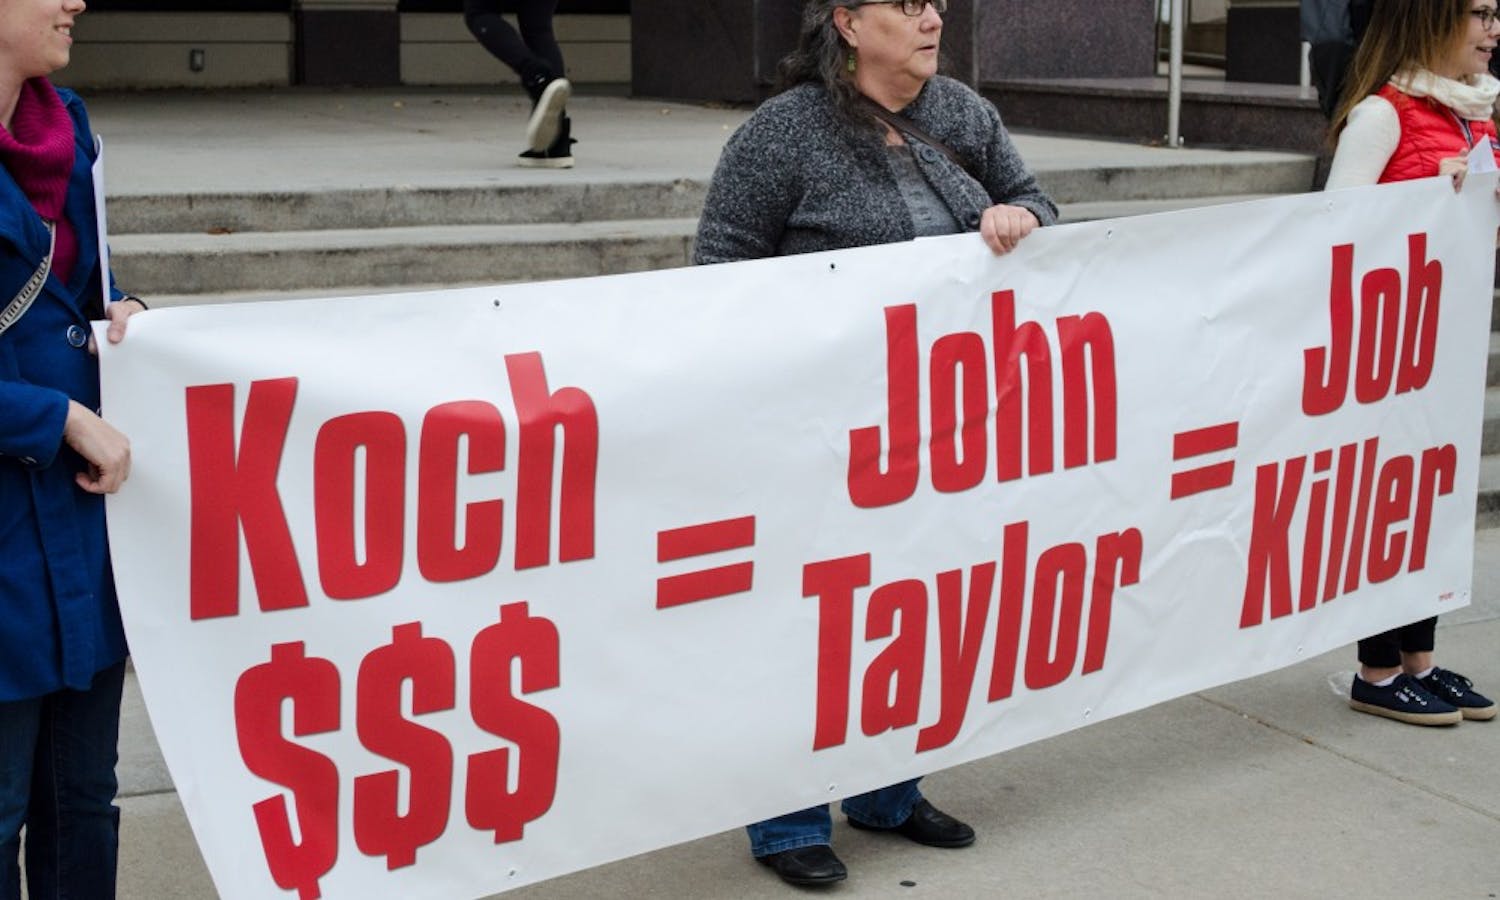 UW-Madison students and community members&nbsp;held a banner denouncing potential Fed Chair nominee John Taylor.